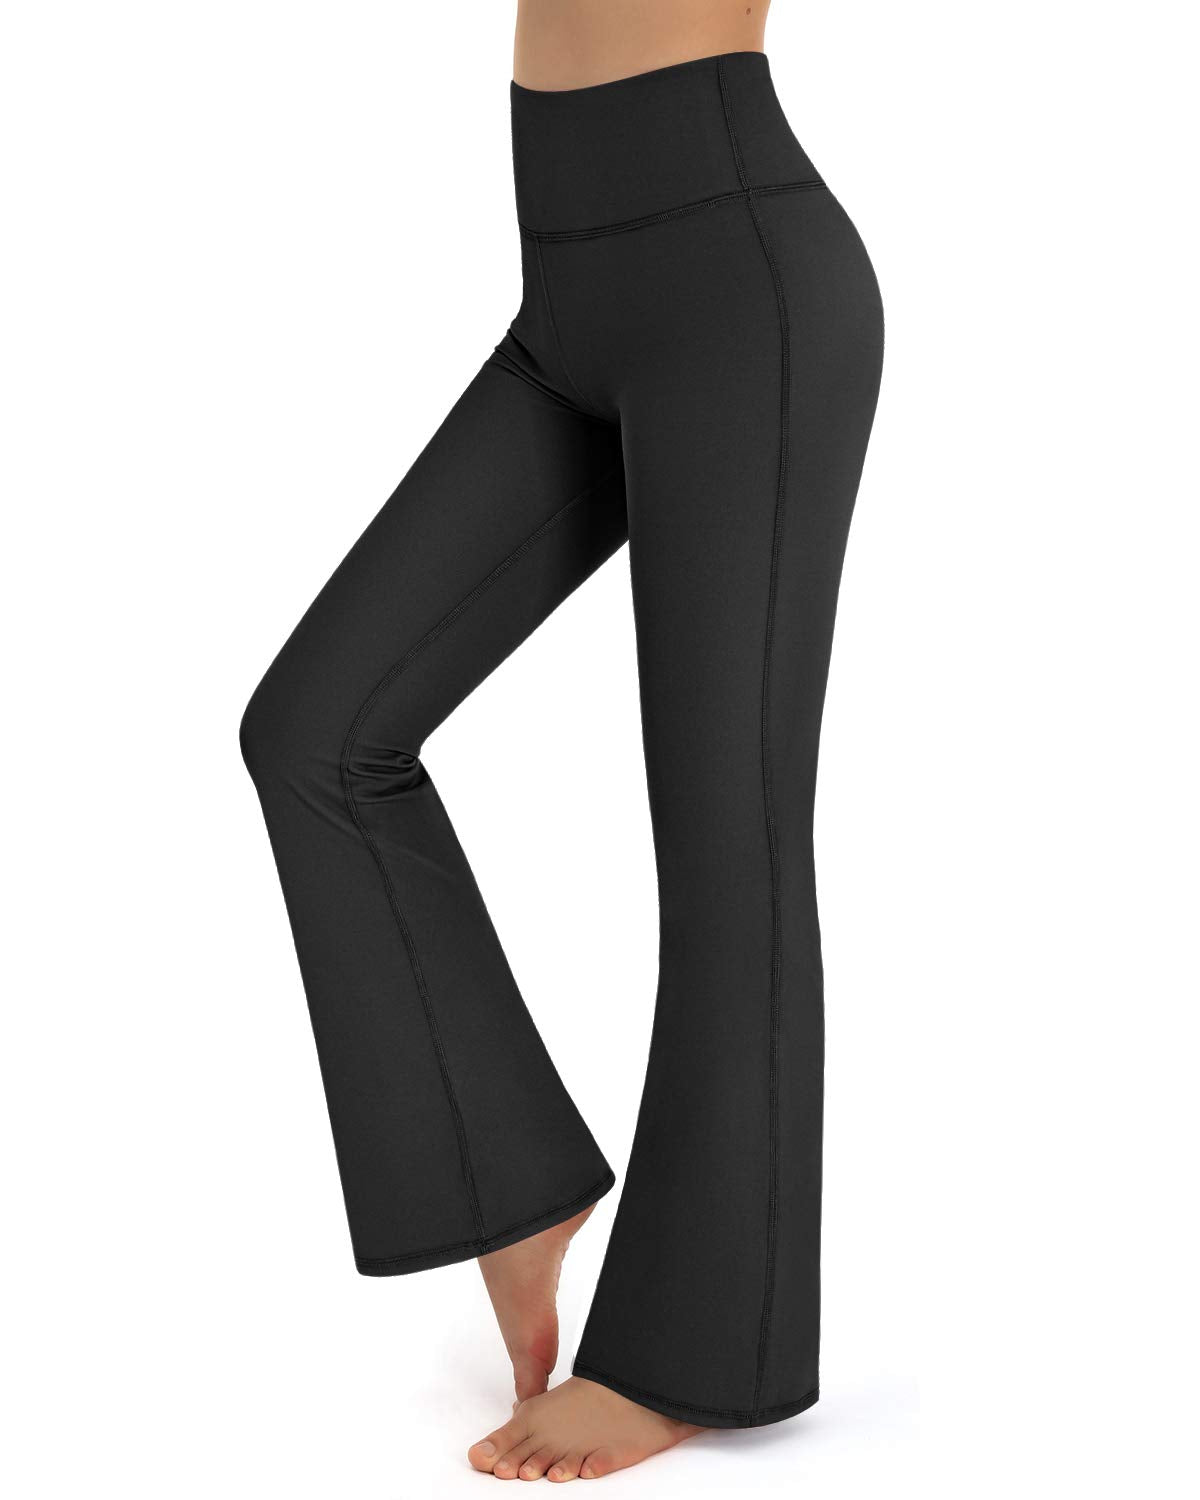 Promover Bootcut Yoga Pants with Pockets Women Sports Trousers